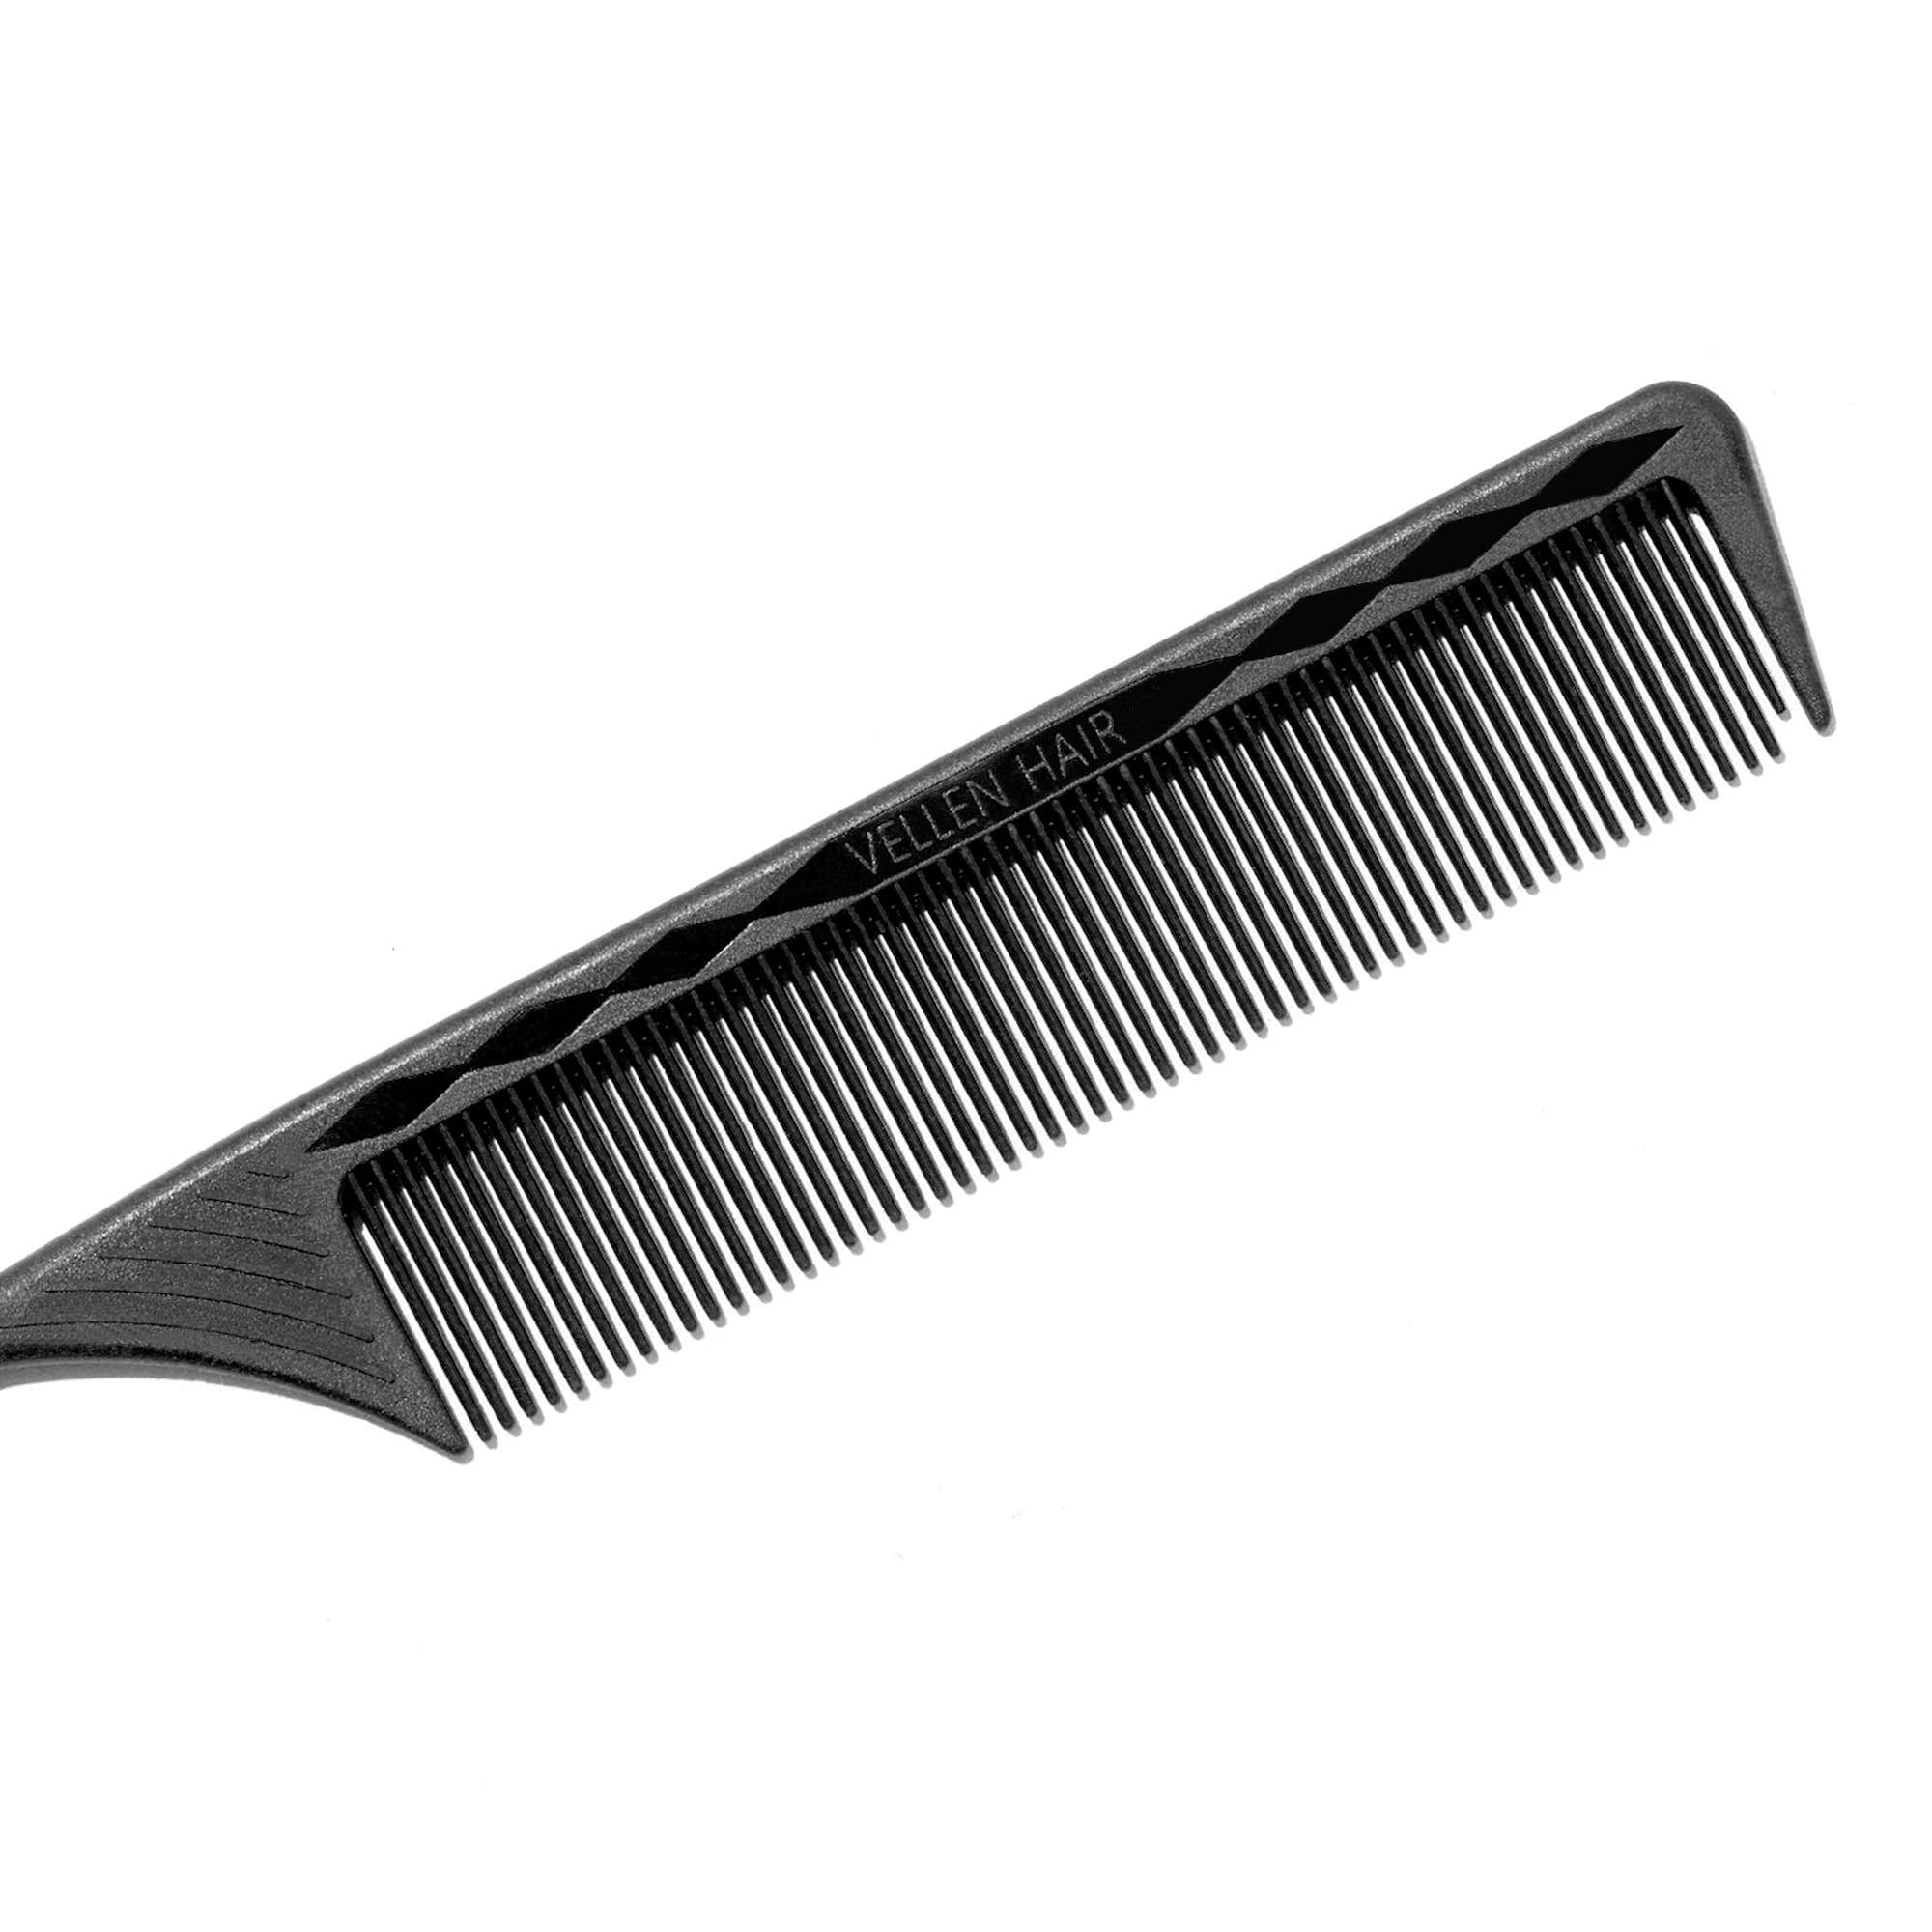 VELLEN HAIR® ULTIMATE PIN TAIL COMBS 3 PACK - BLACK